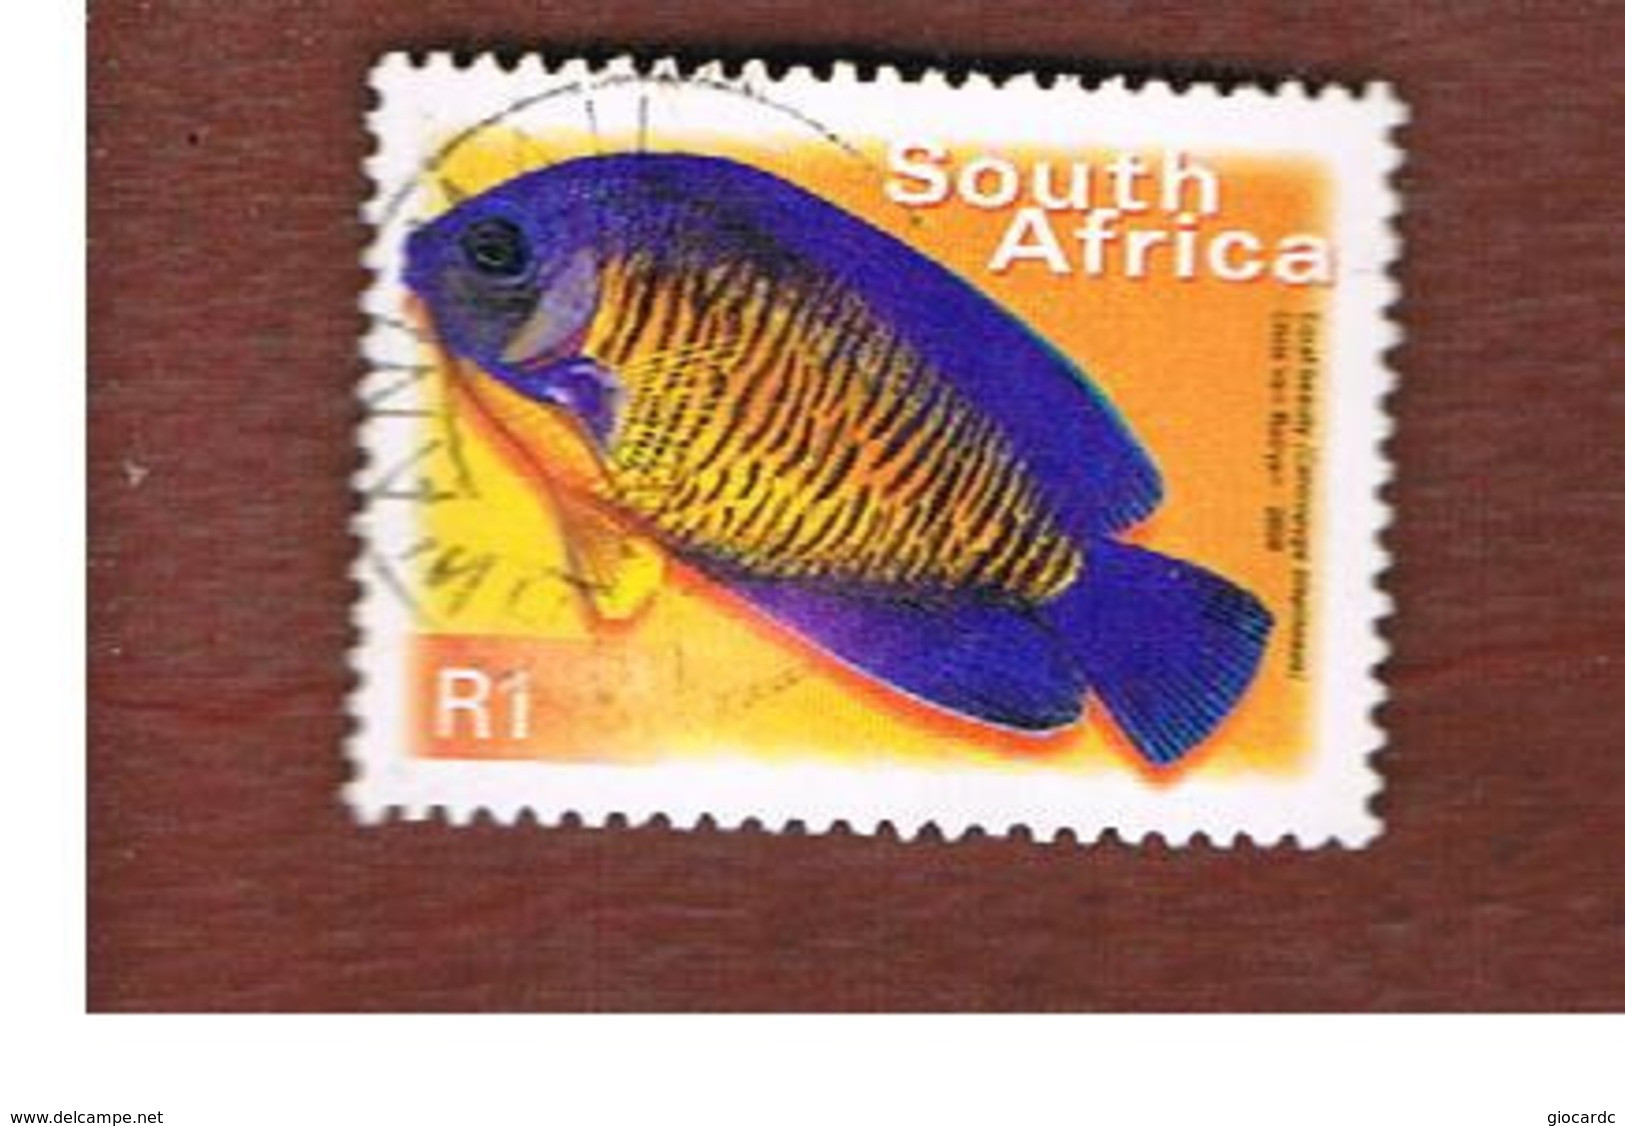 SUD AFRICA (SOUTH AFRICA) - SG 1215   -   2000 FISHES: CORAL BEAUTY  - USED - Oblitérés